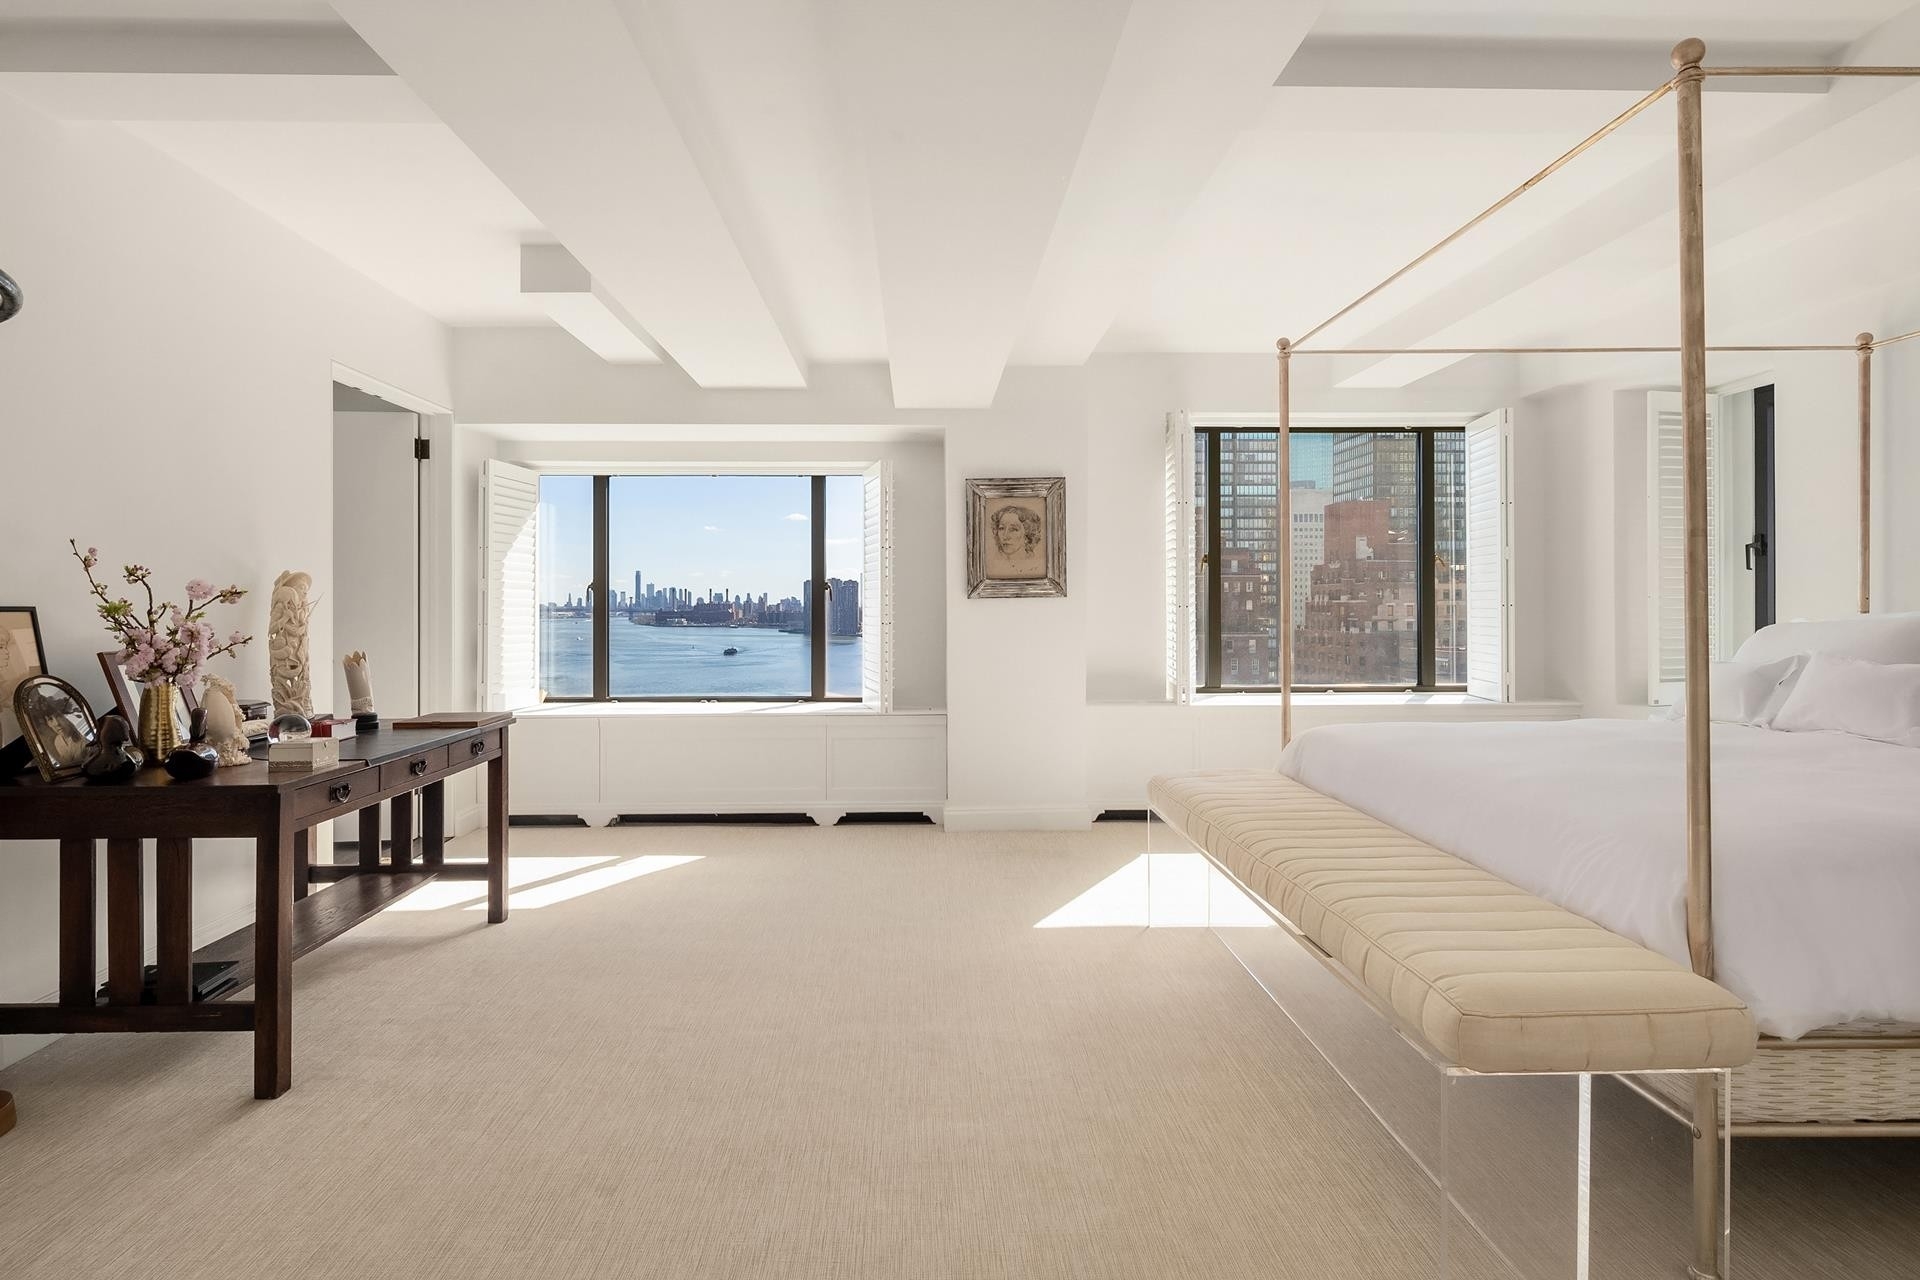 10. Co-op Properties for Sale at The Campanile, 450 E 52ND ST, 15 Beekman, New York, NY 10022